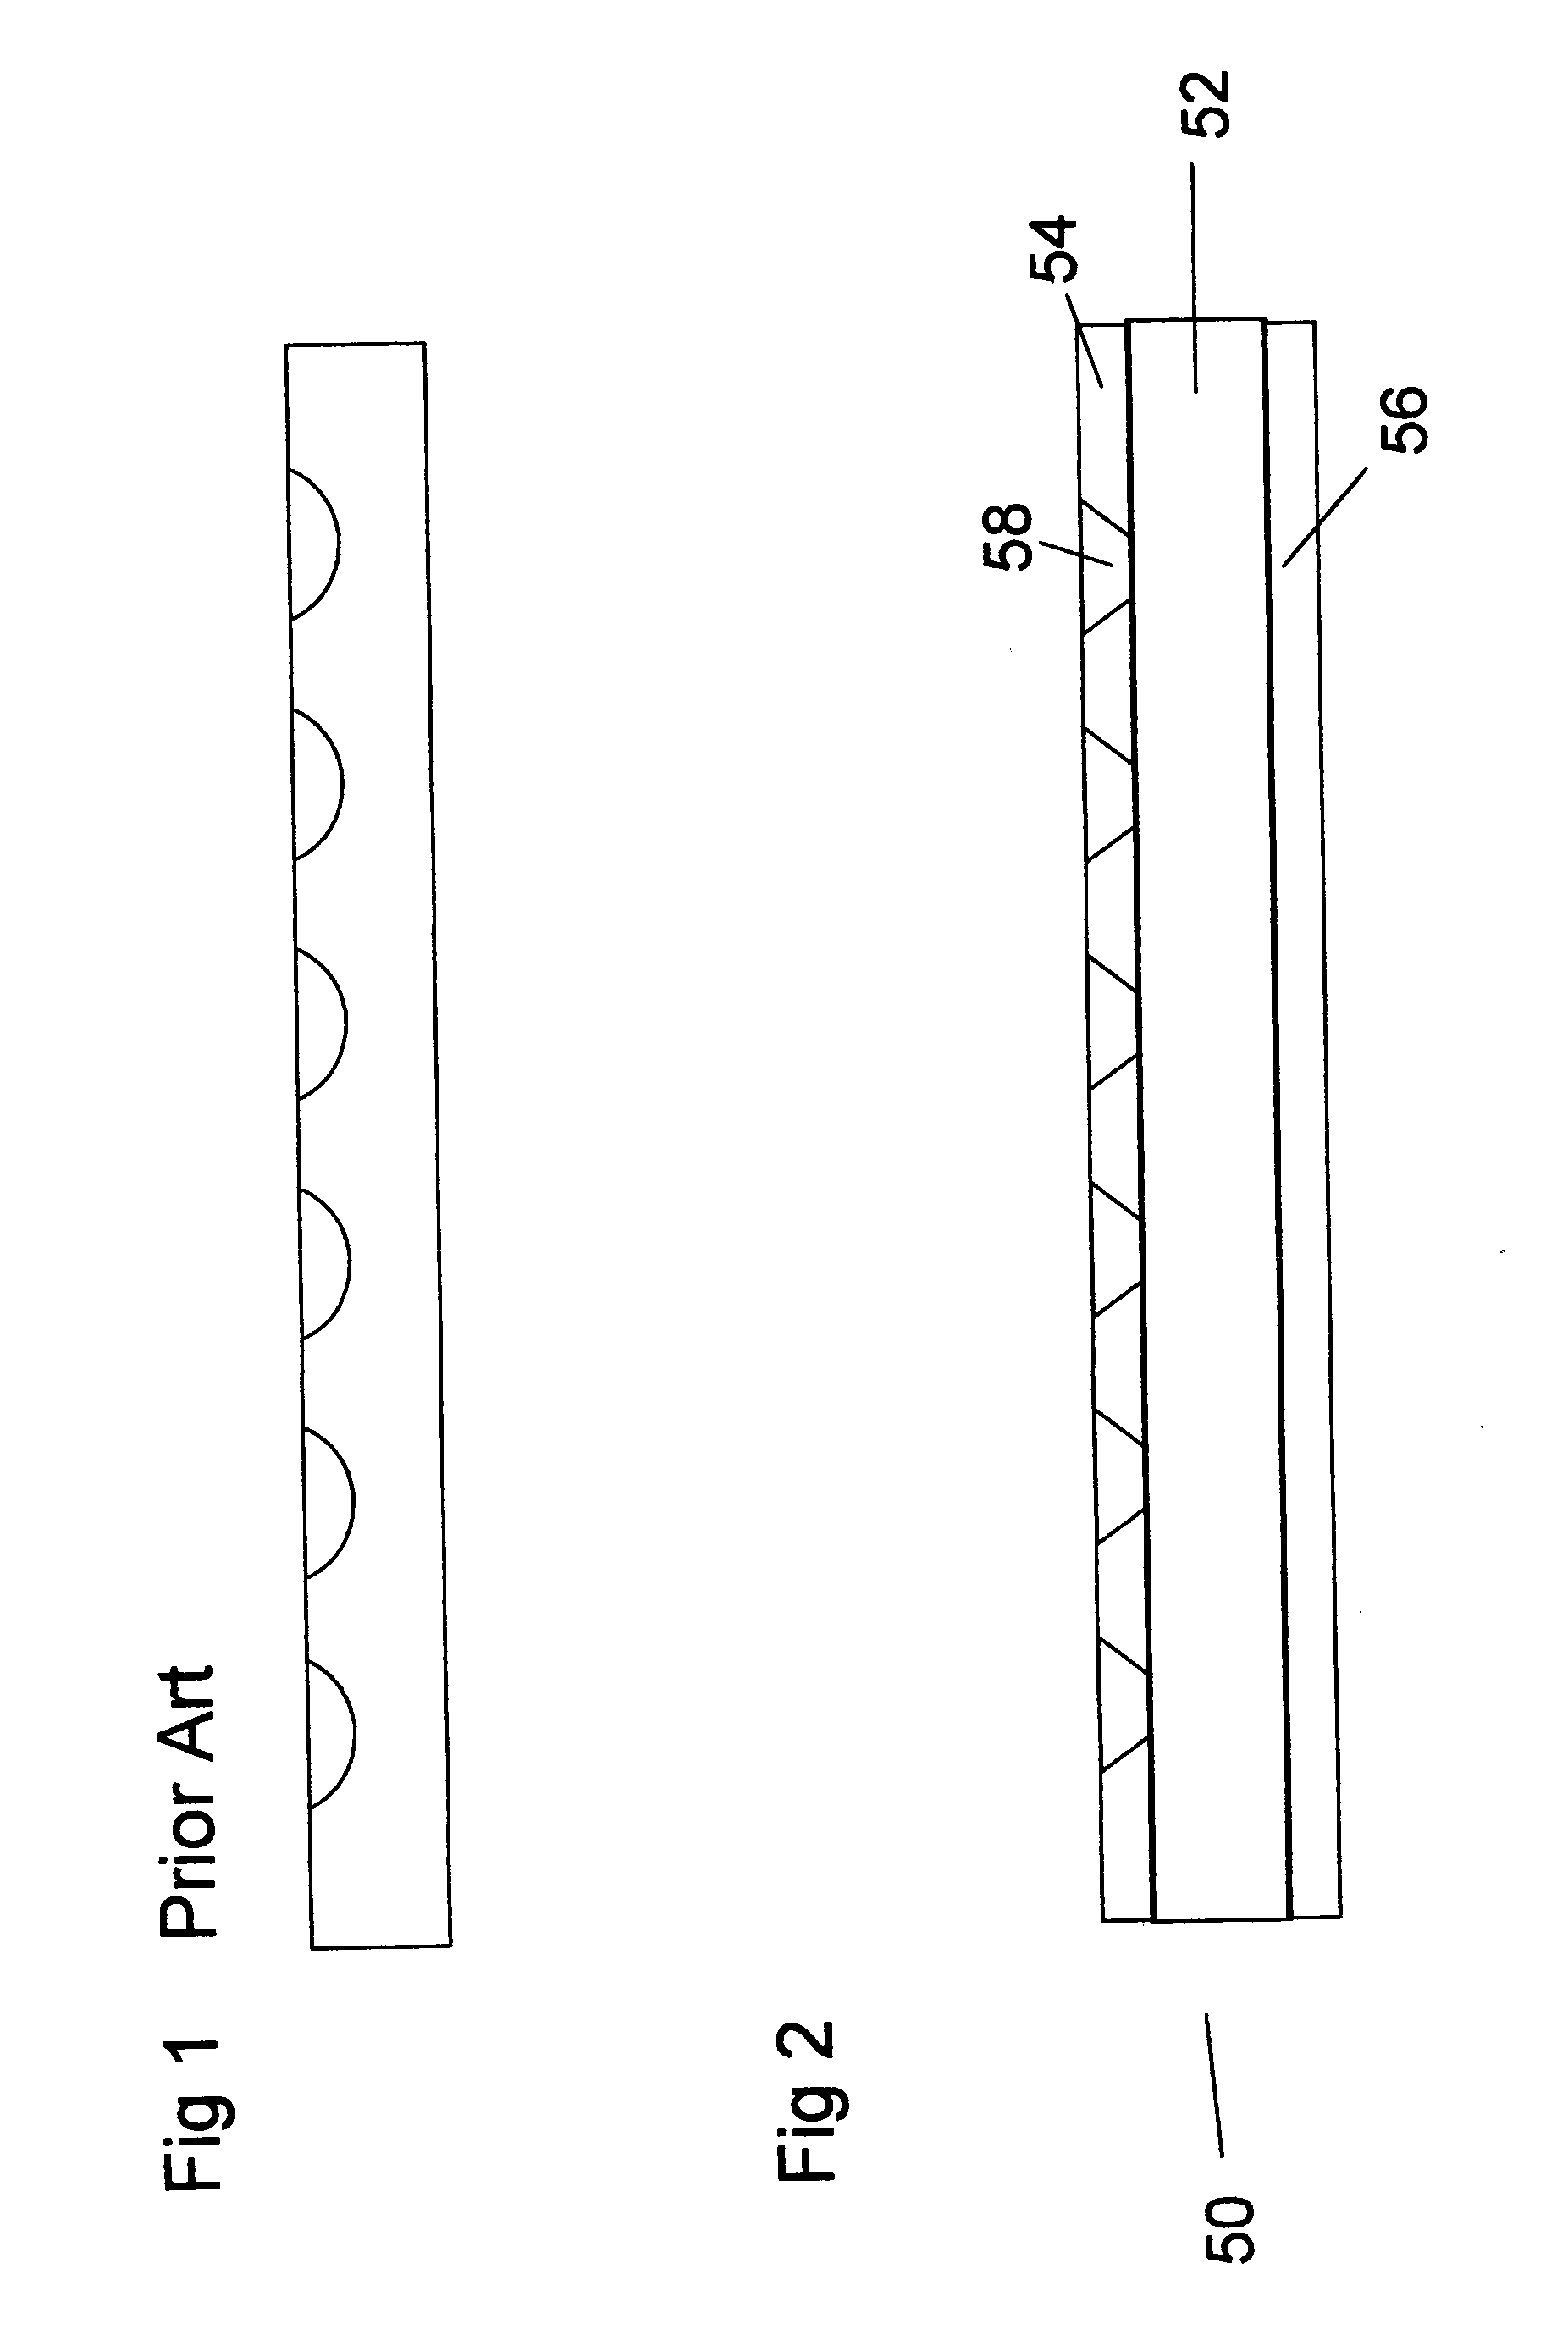 Composite solder transfer moldplate structure and method of making same